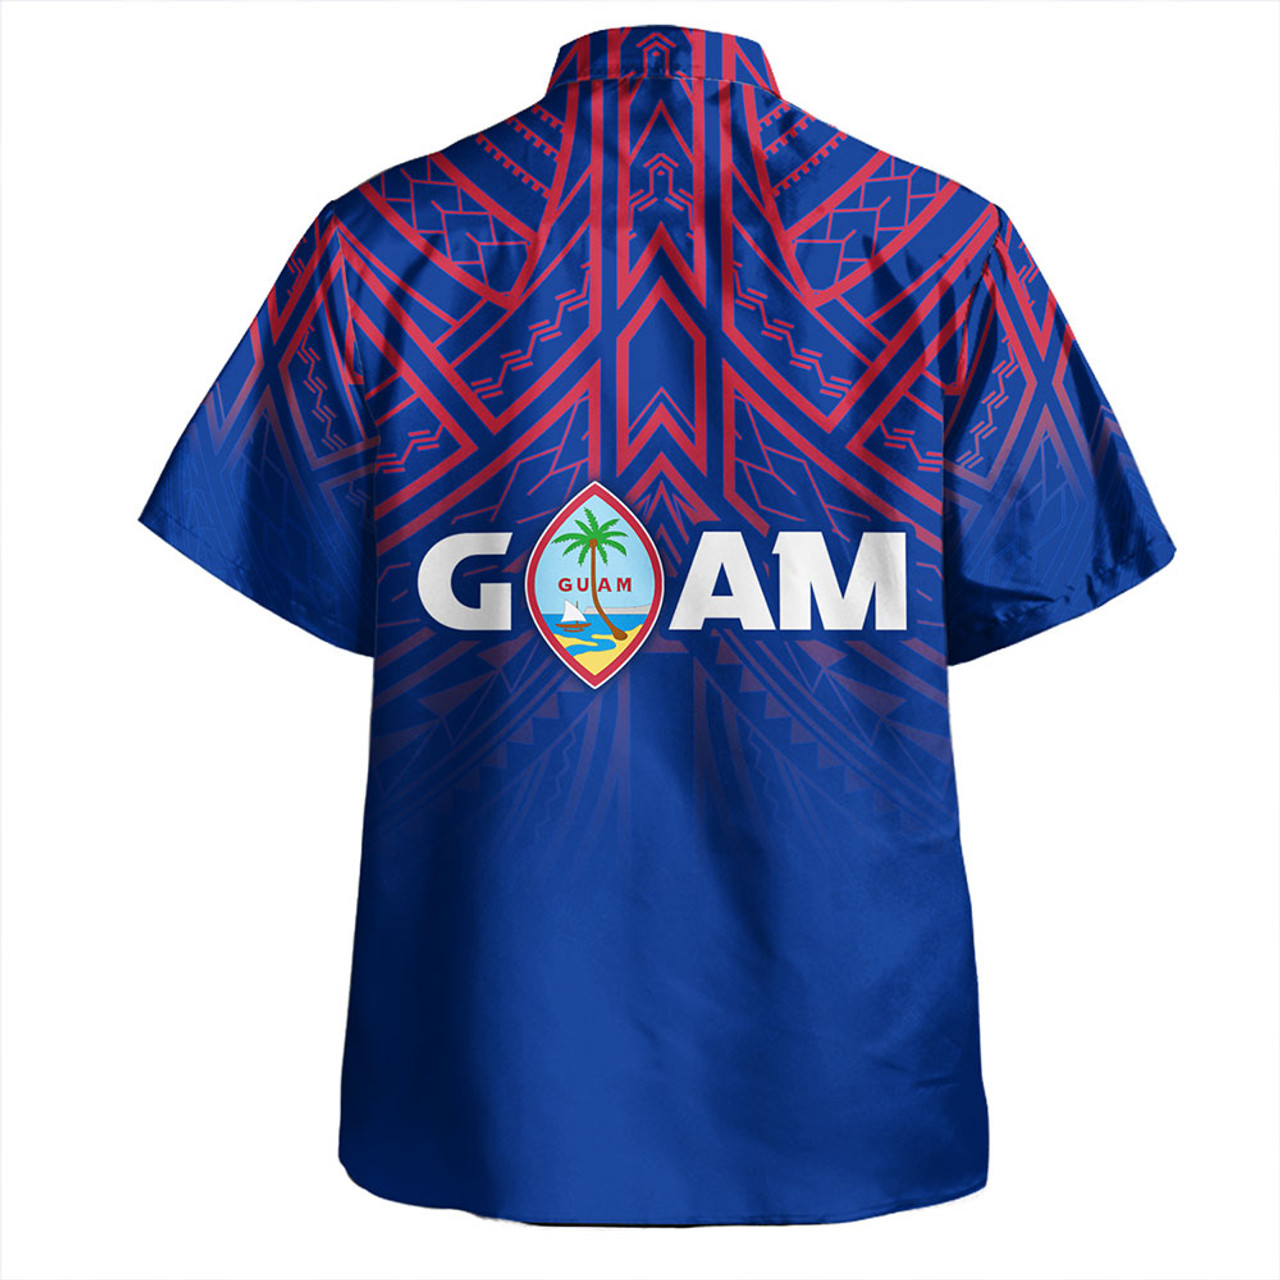 Guam Hawaiian Shirt - Flag Color With Traditional Patterns